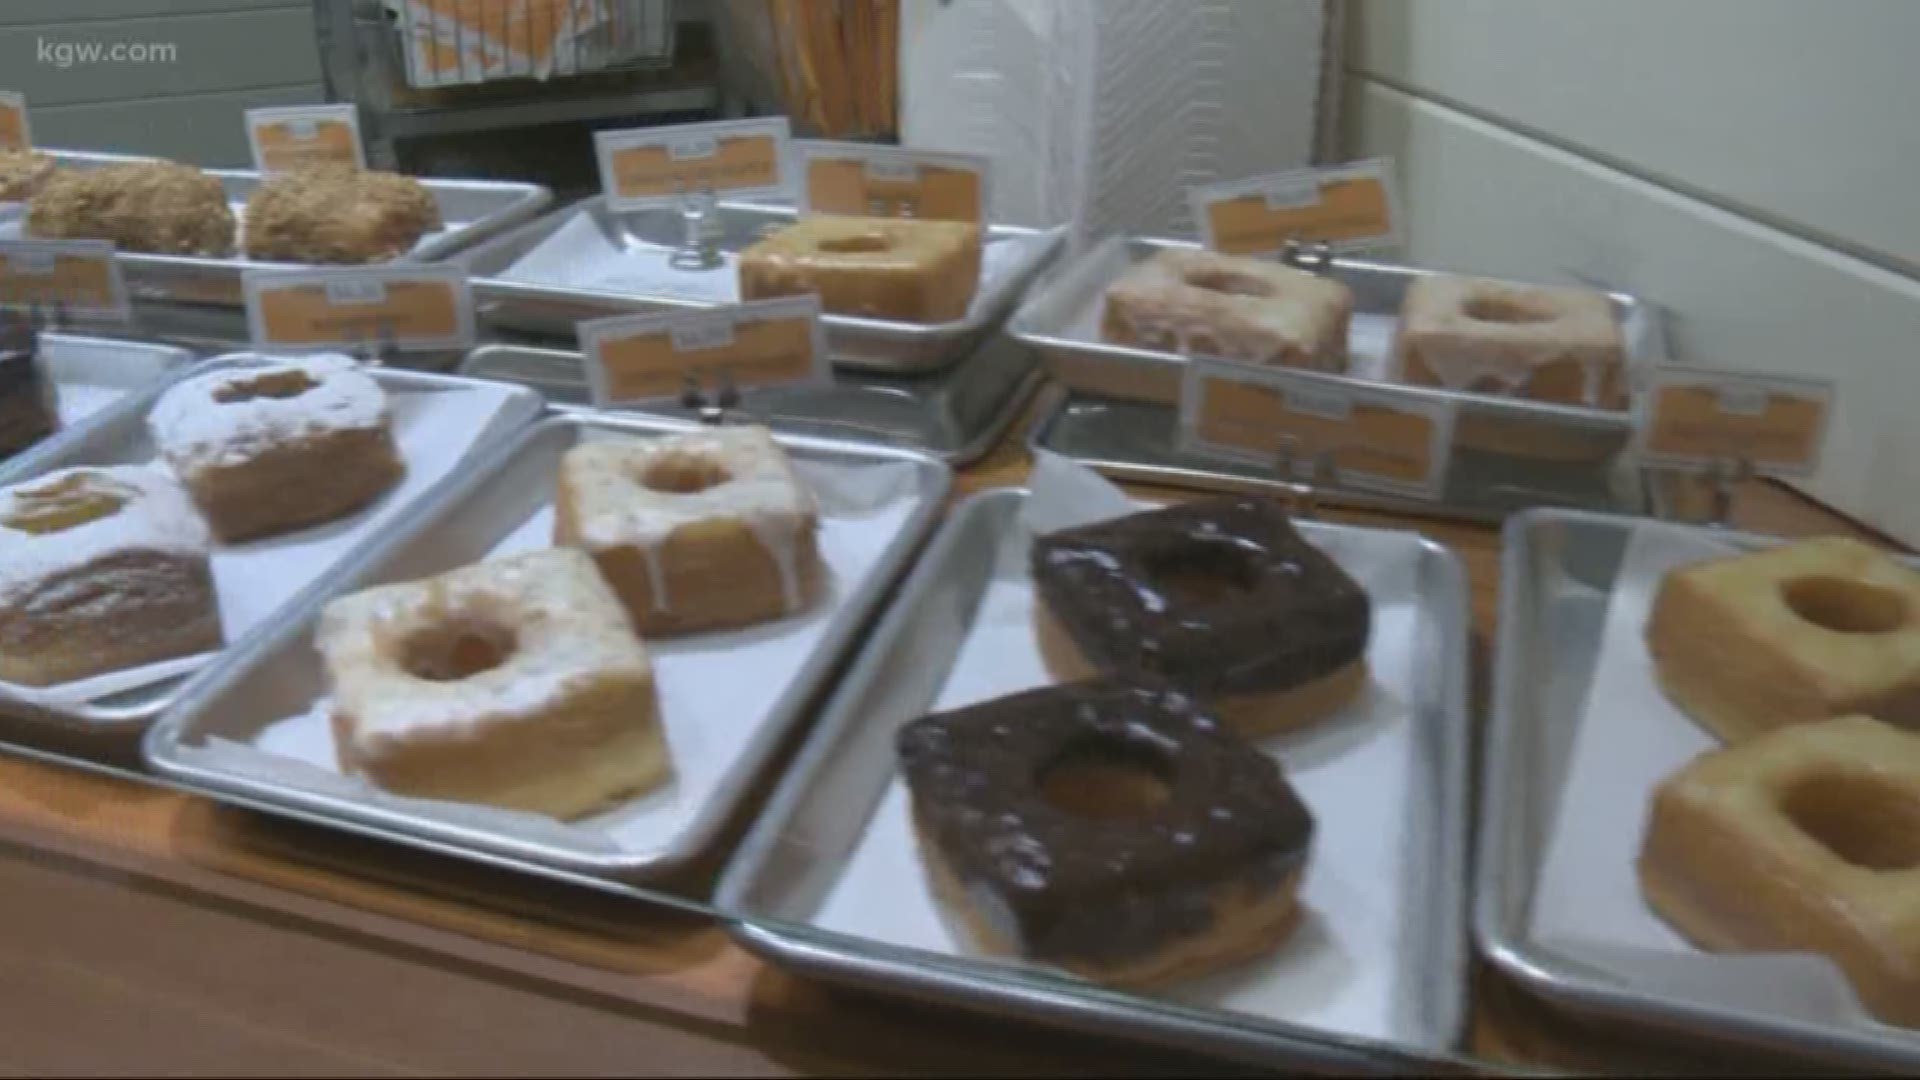 Underground Donut tour comes to the Rose City that visits the best donut shops in Portland.